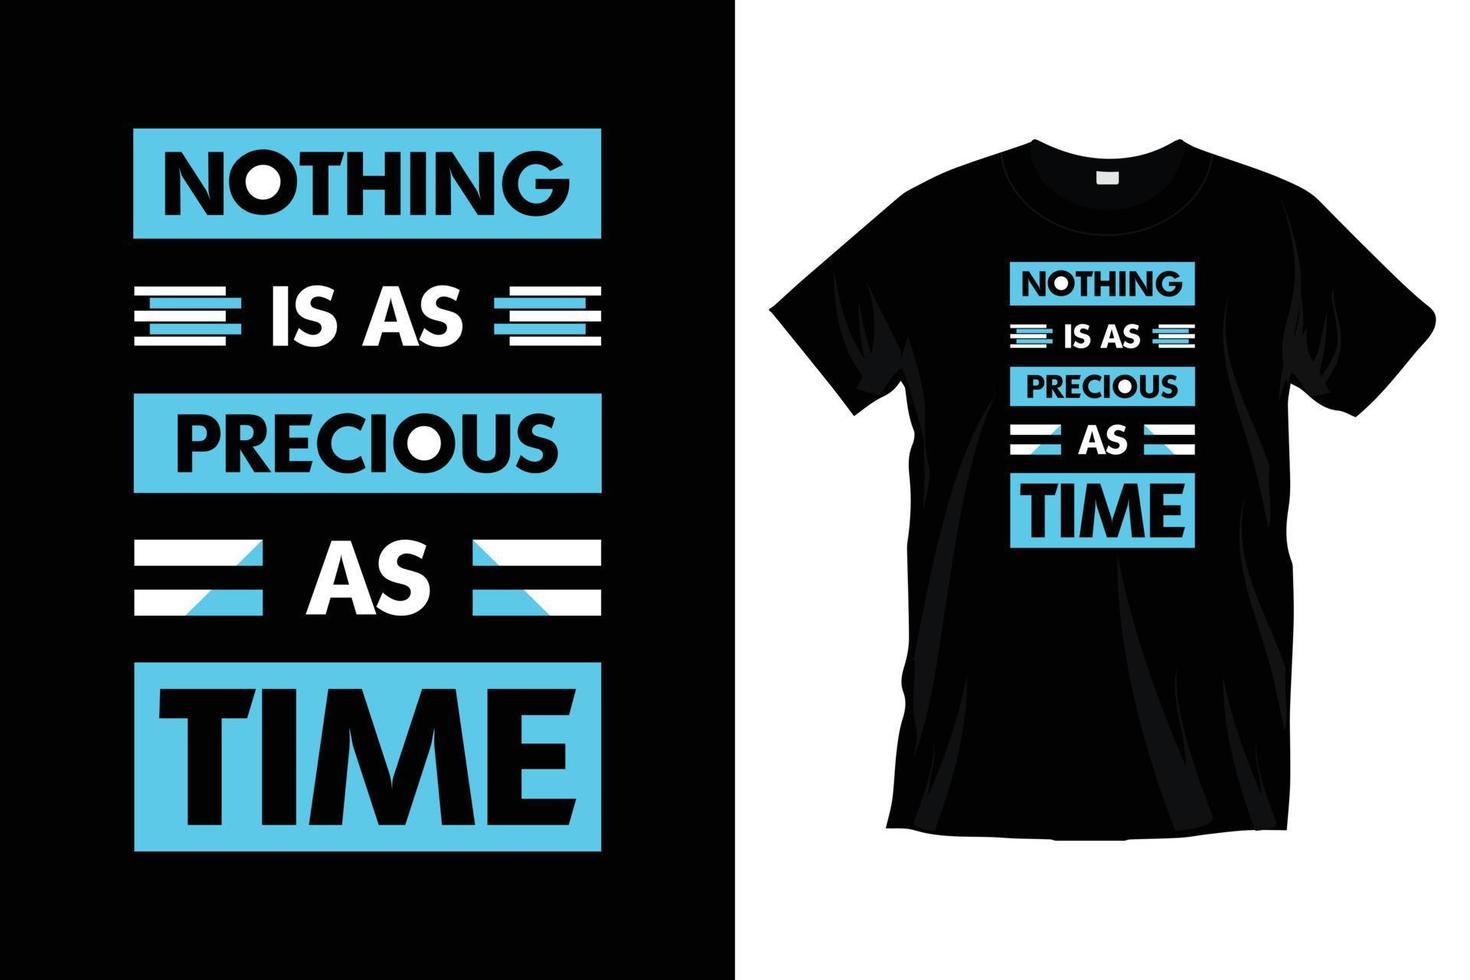 Nothing is as precious as time. Motivational inspirational typography t shirt design for prints, apparel, vector, art, illustration, typography, poster, template, trendy black tee shirt design. vector